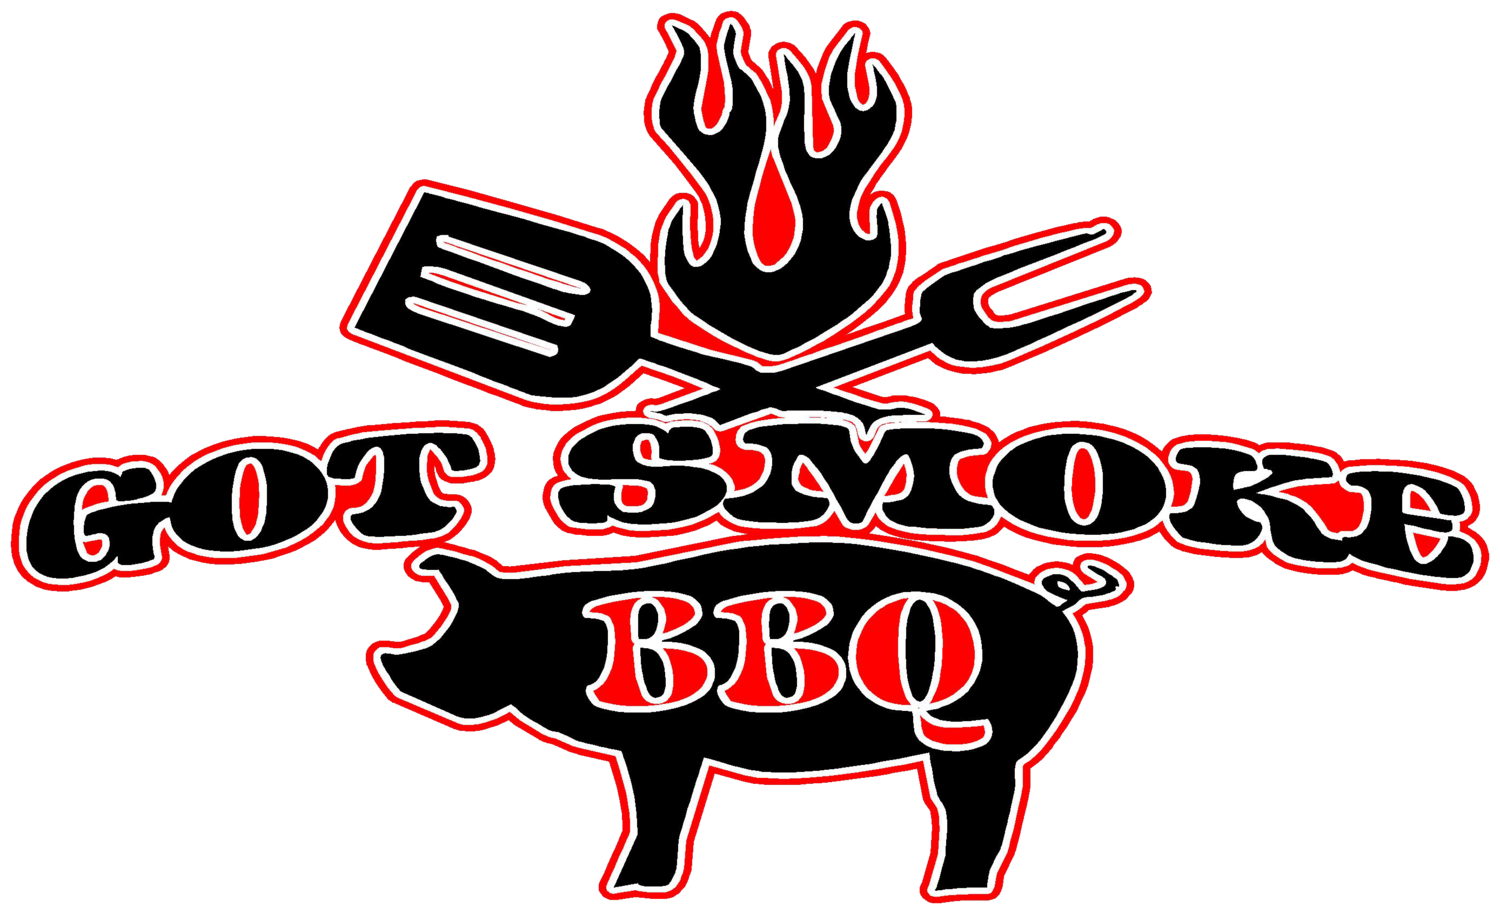 Got Smoke BBQ Events and Catering Inc.